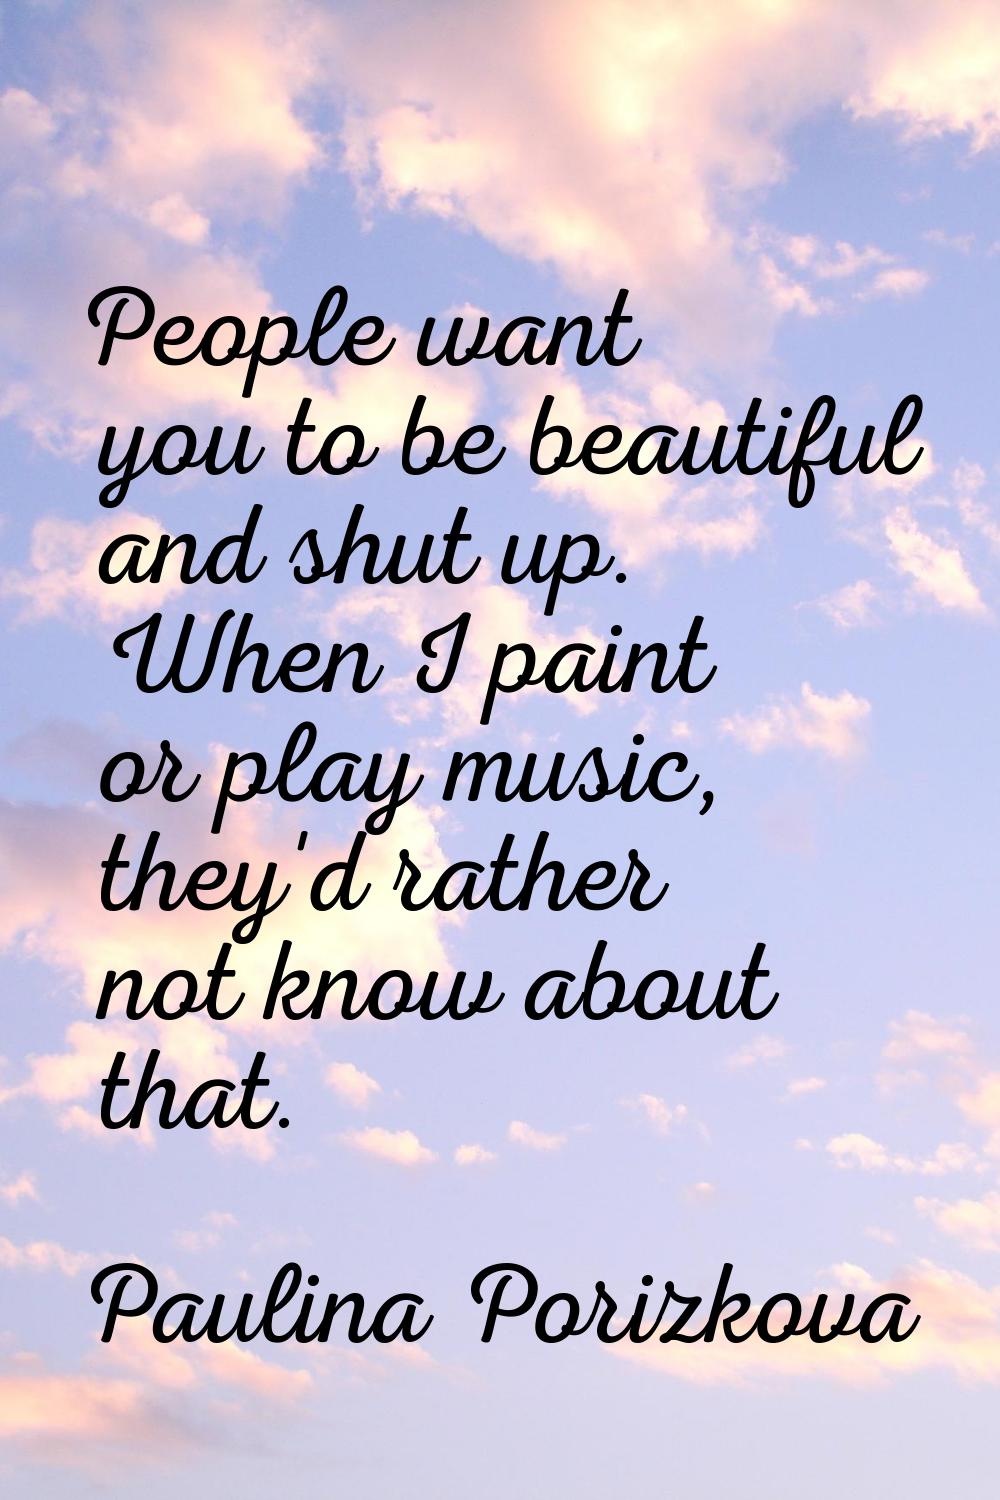 People want you to be beautiful and shut up. When I paint or play music, they'd rather not know abo